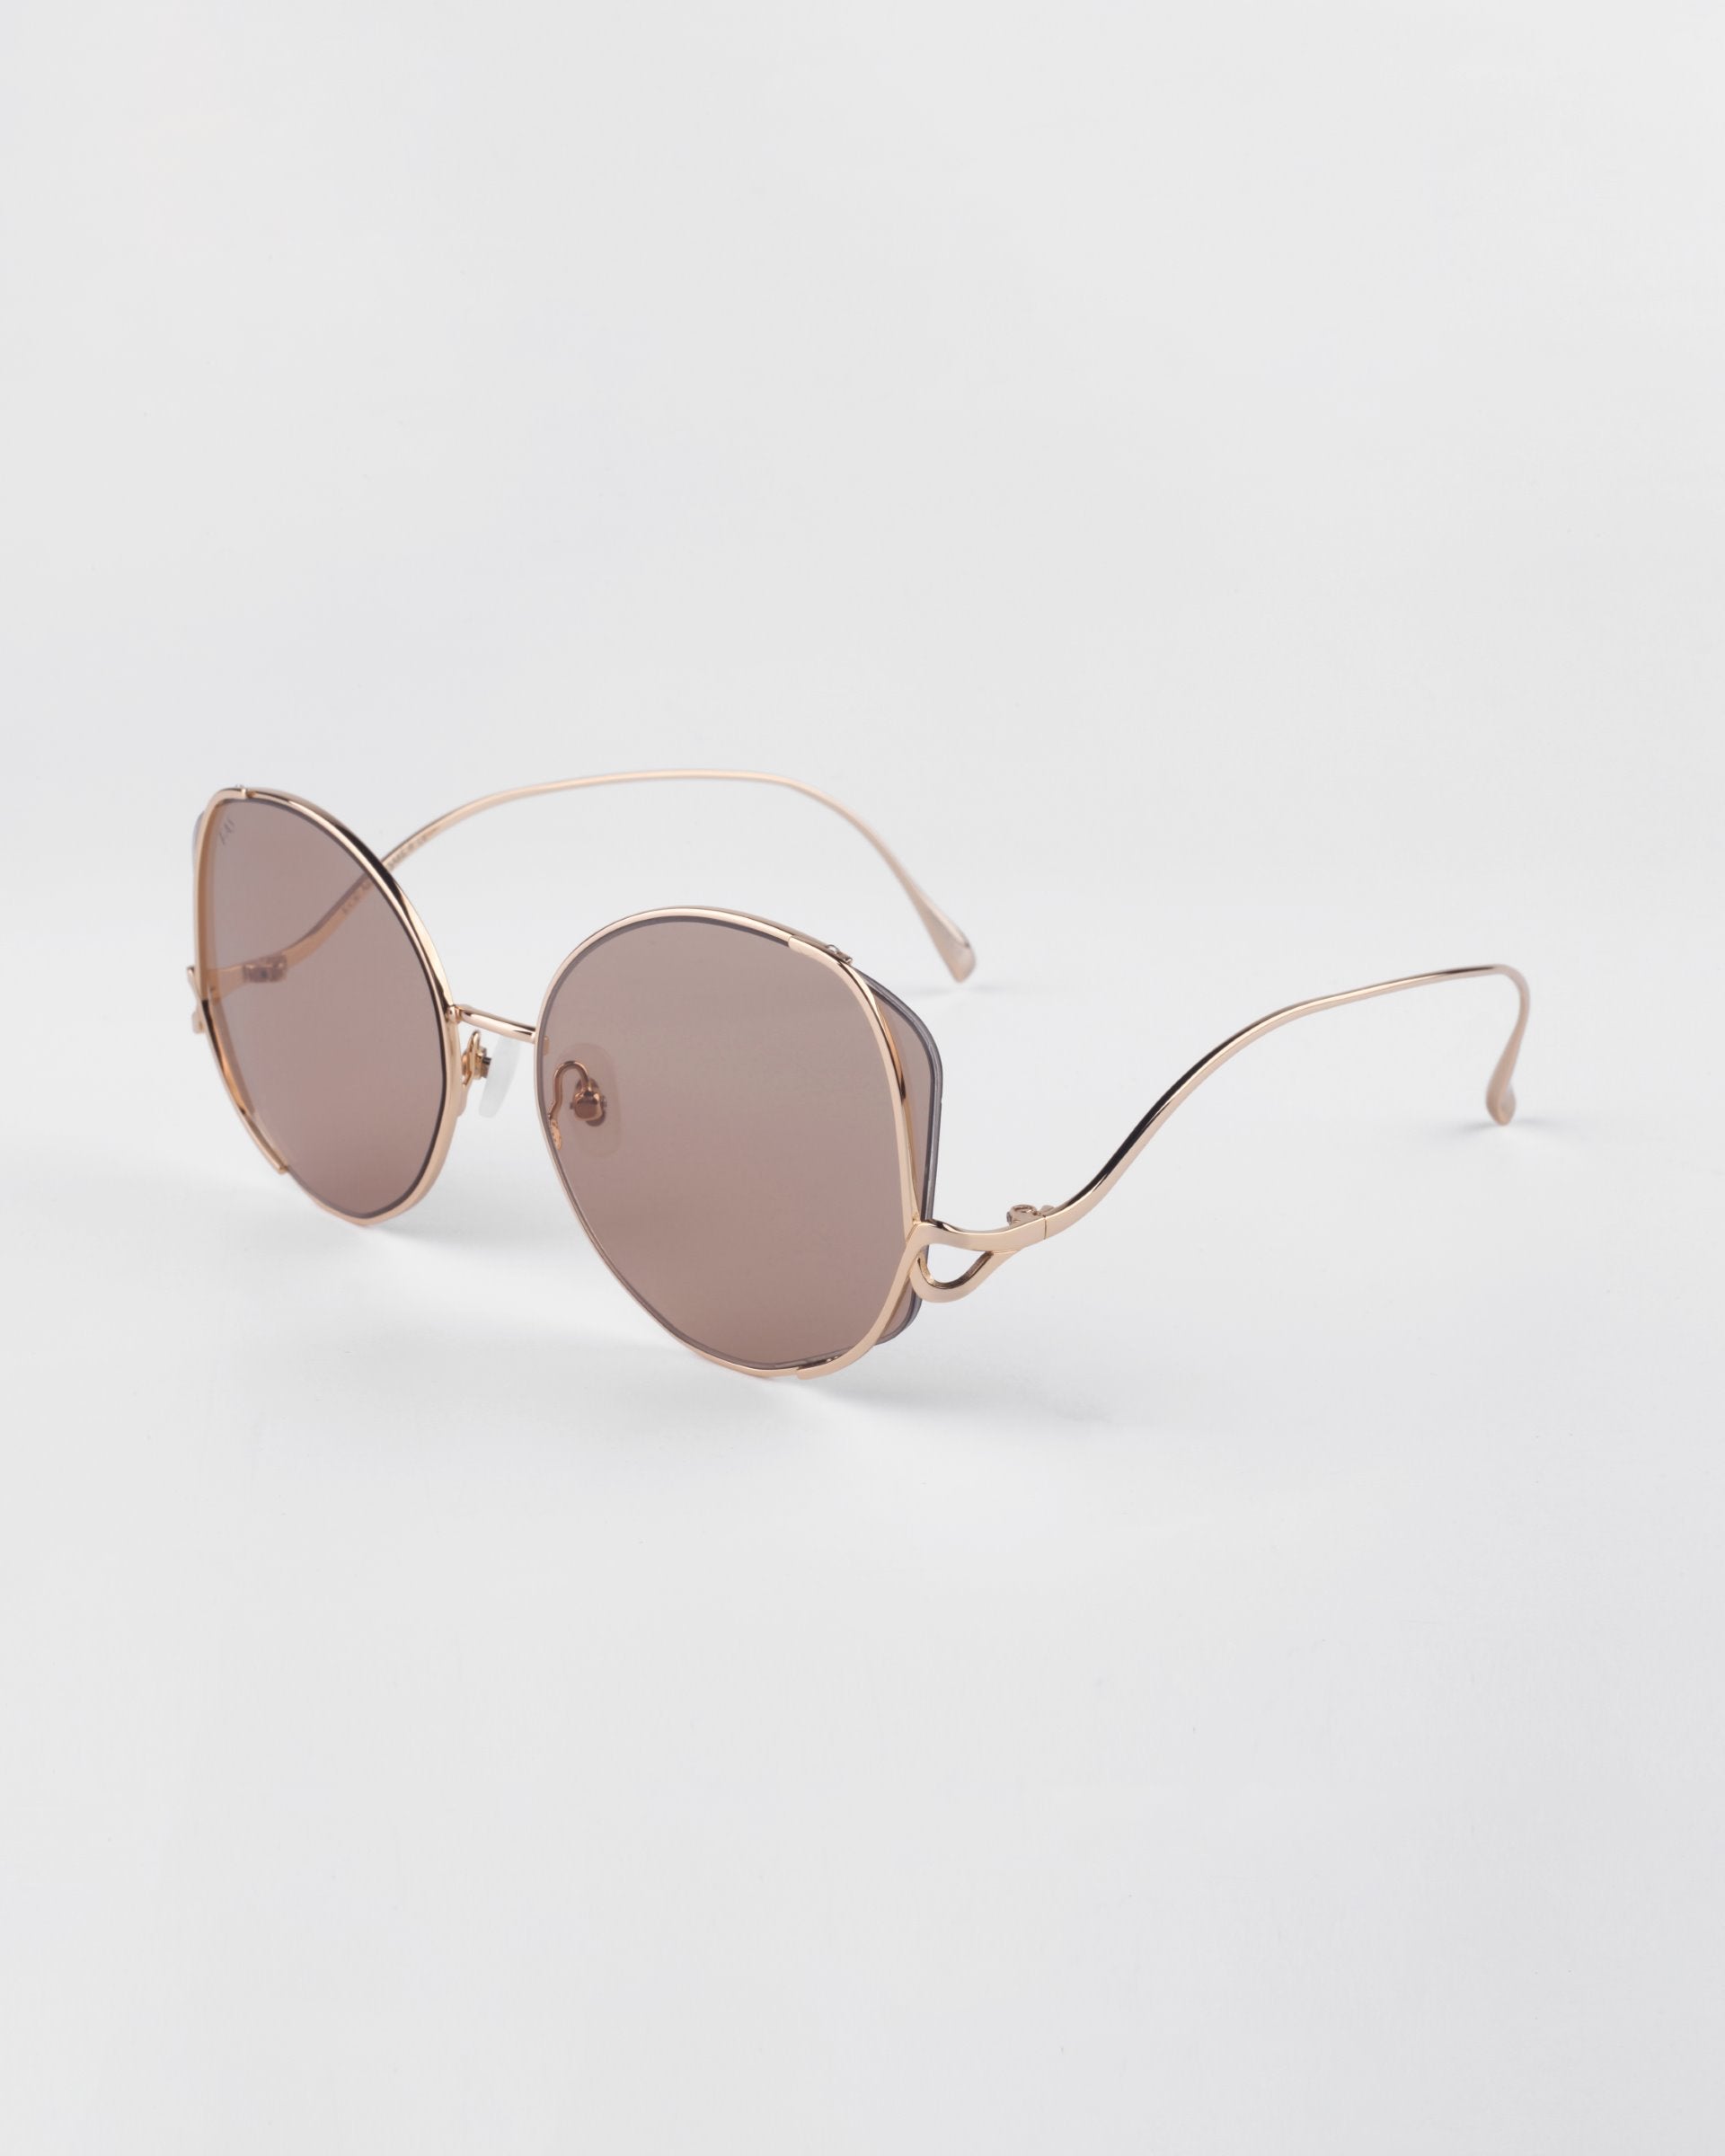 For Art's Sake 'Canvas' sunglasses in sand. A side view image showing the gold frame details with circle shapes. 